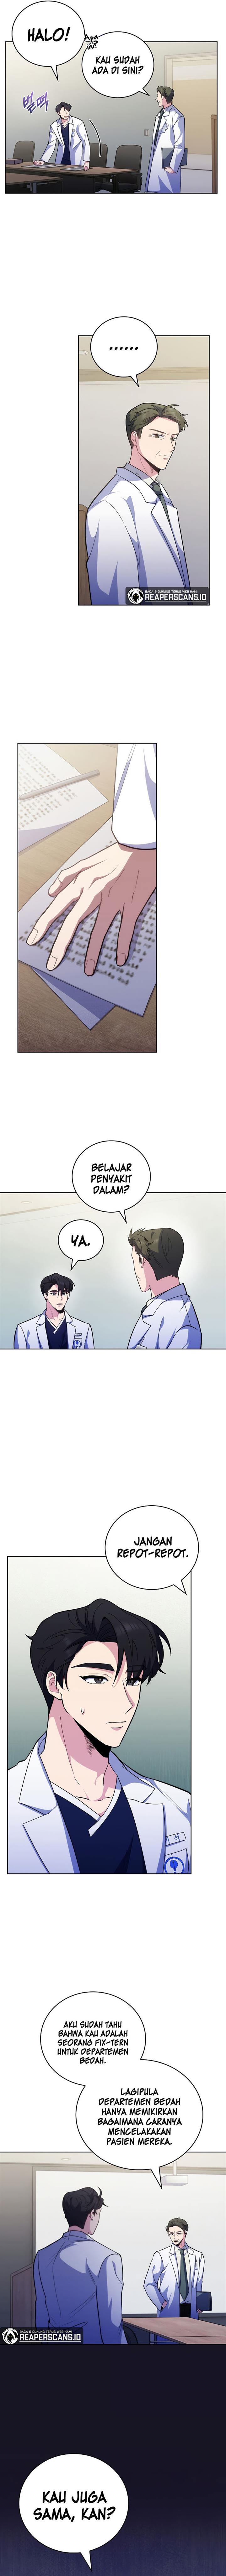 Level-Up Doctor Chapter 40